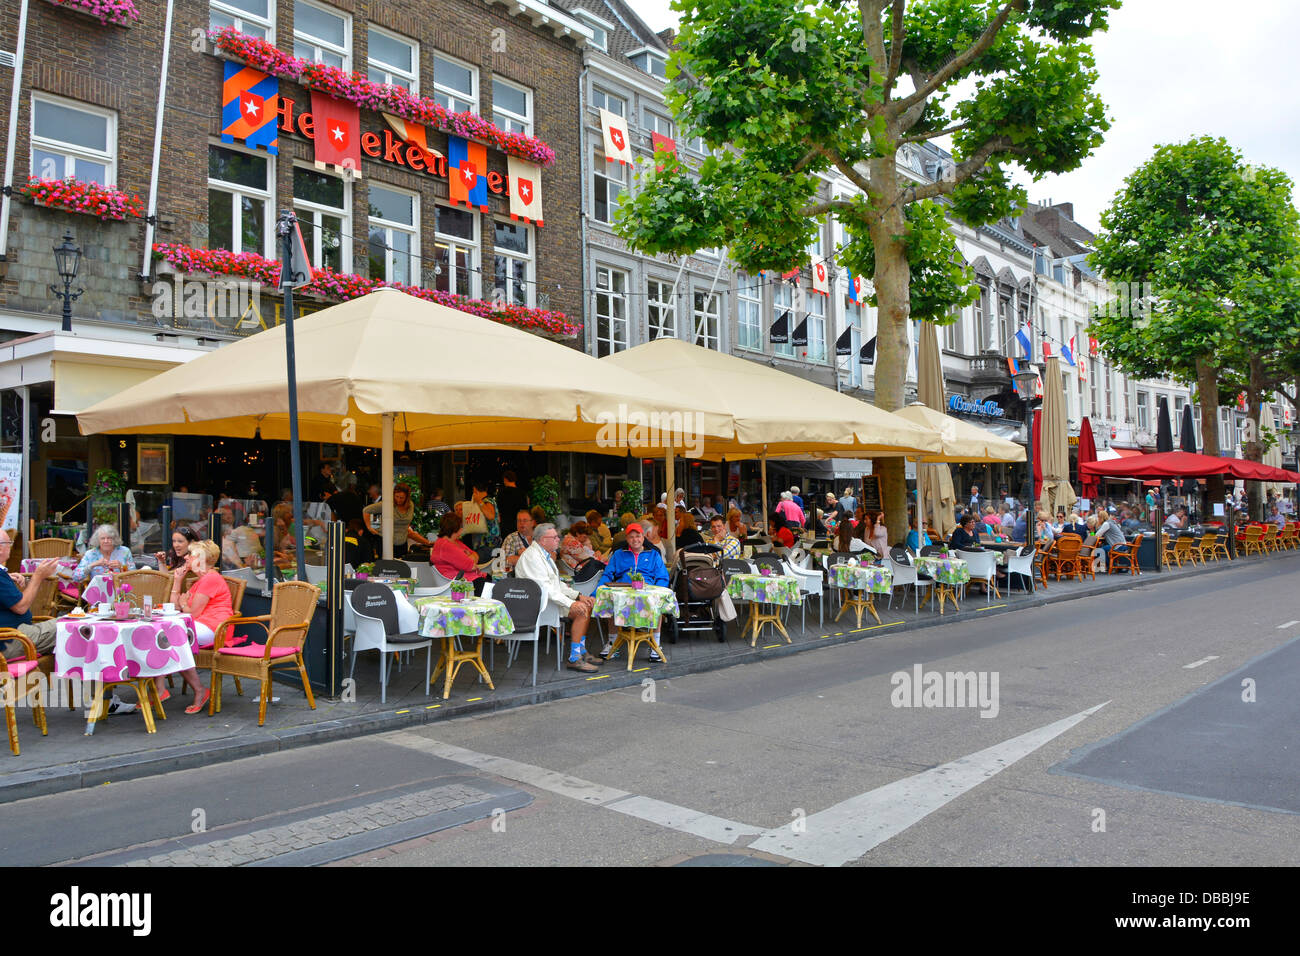 Maastricht City one side of Vrijthof Square ticket holders seated outdoors in pavement bars & restaurant tables wait start André Rieu music concert EU Stock Photo